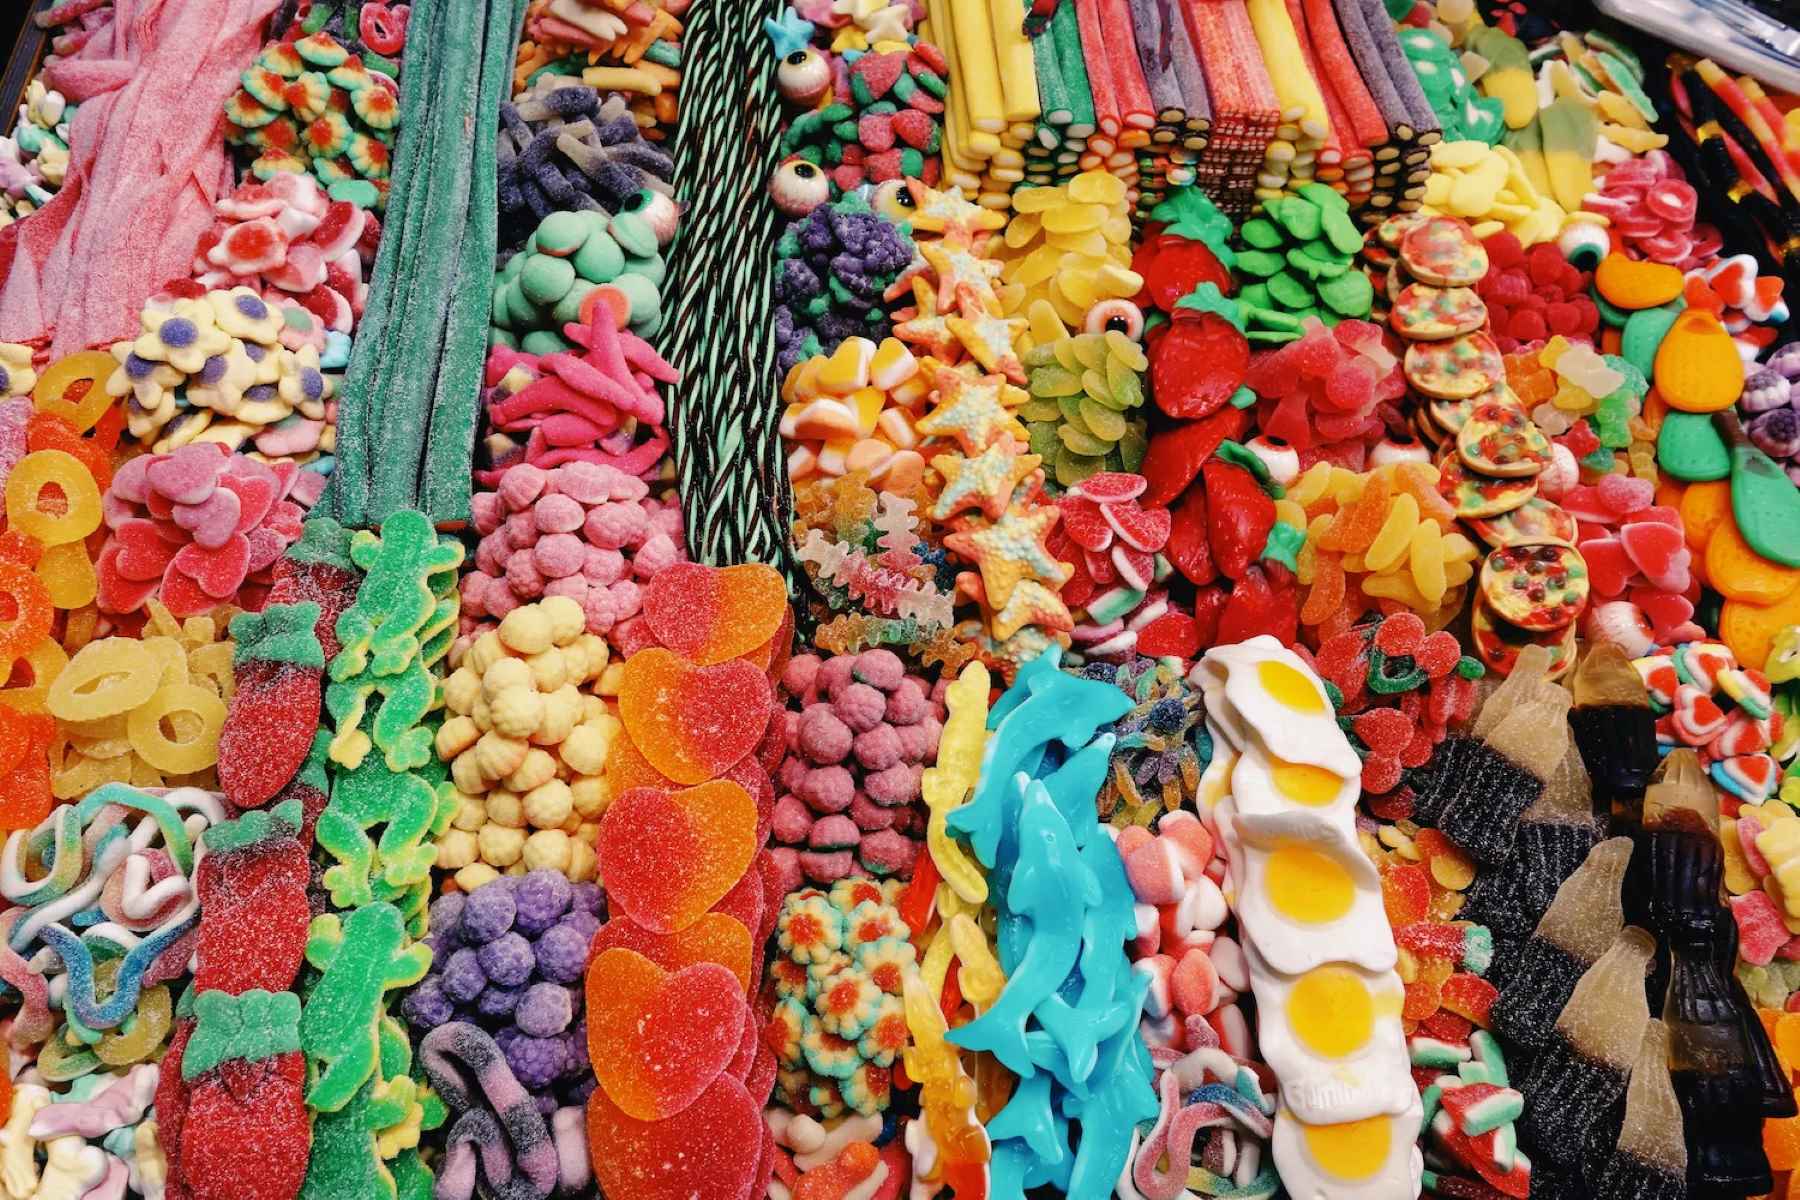 Top 10 Delicious Candies That Start With The Letter ‘N’